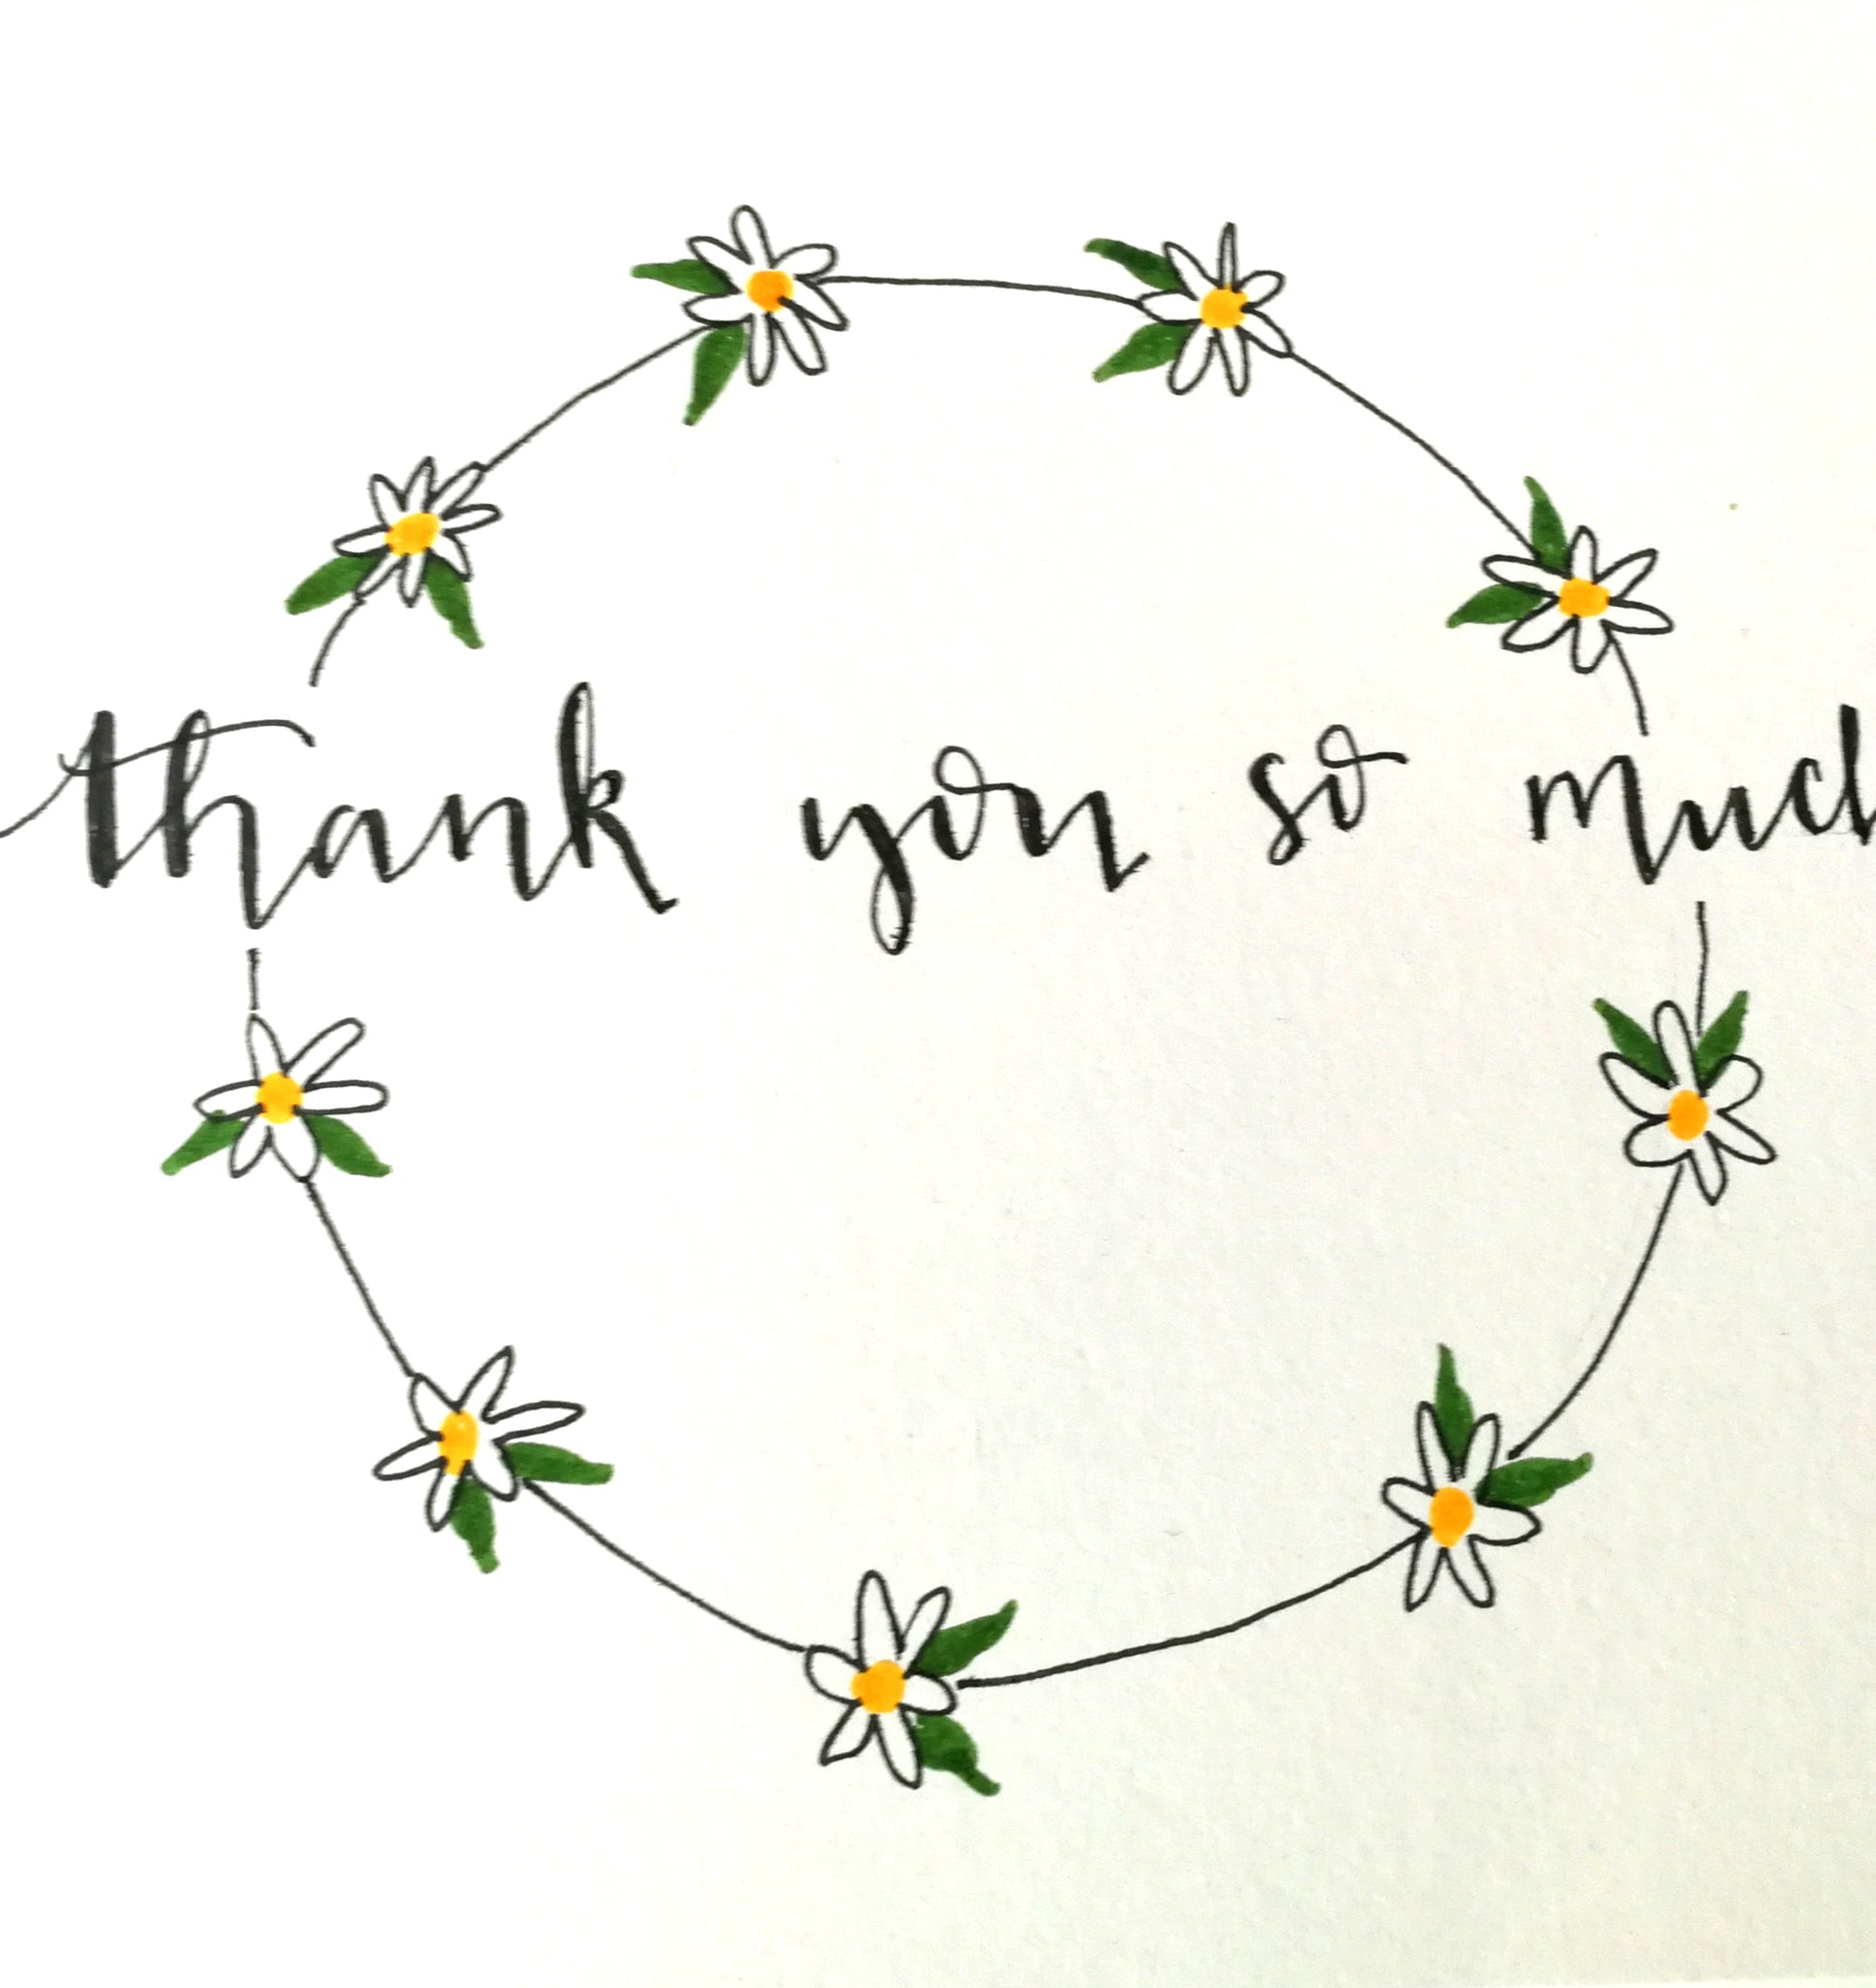 Thank You - greetings card